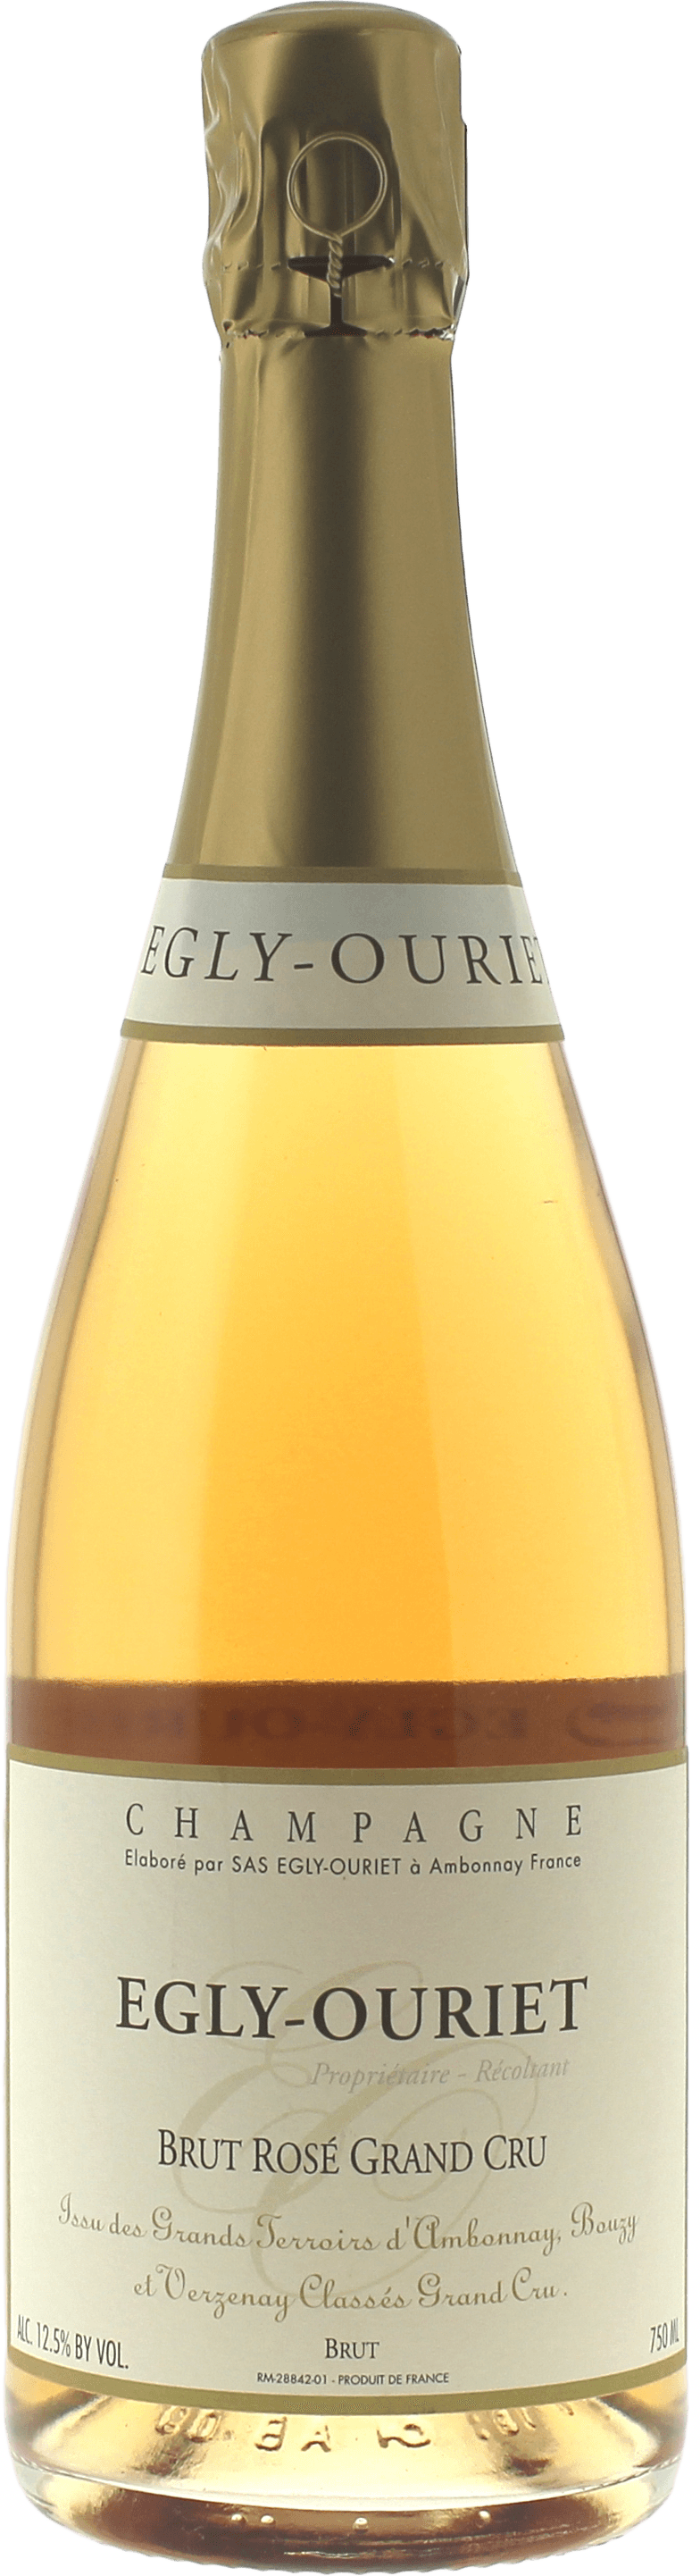 Egly ouriet grand cru ros  EGLY OURIET, Champagne